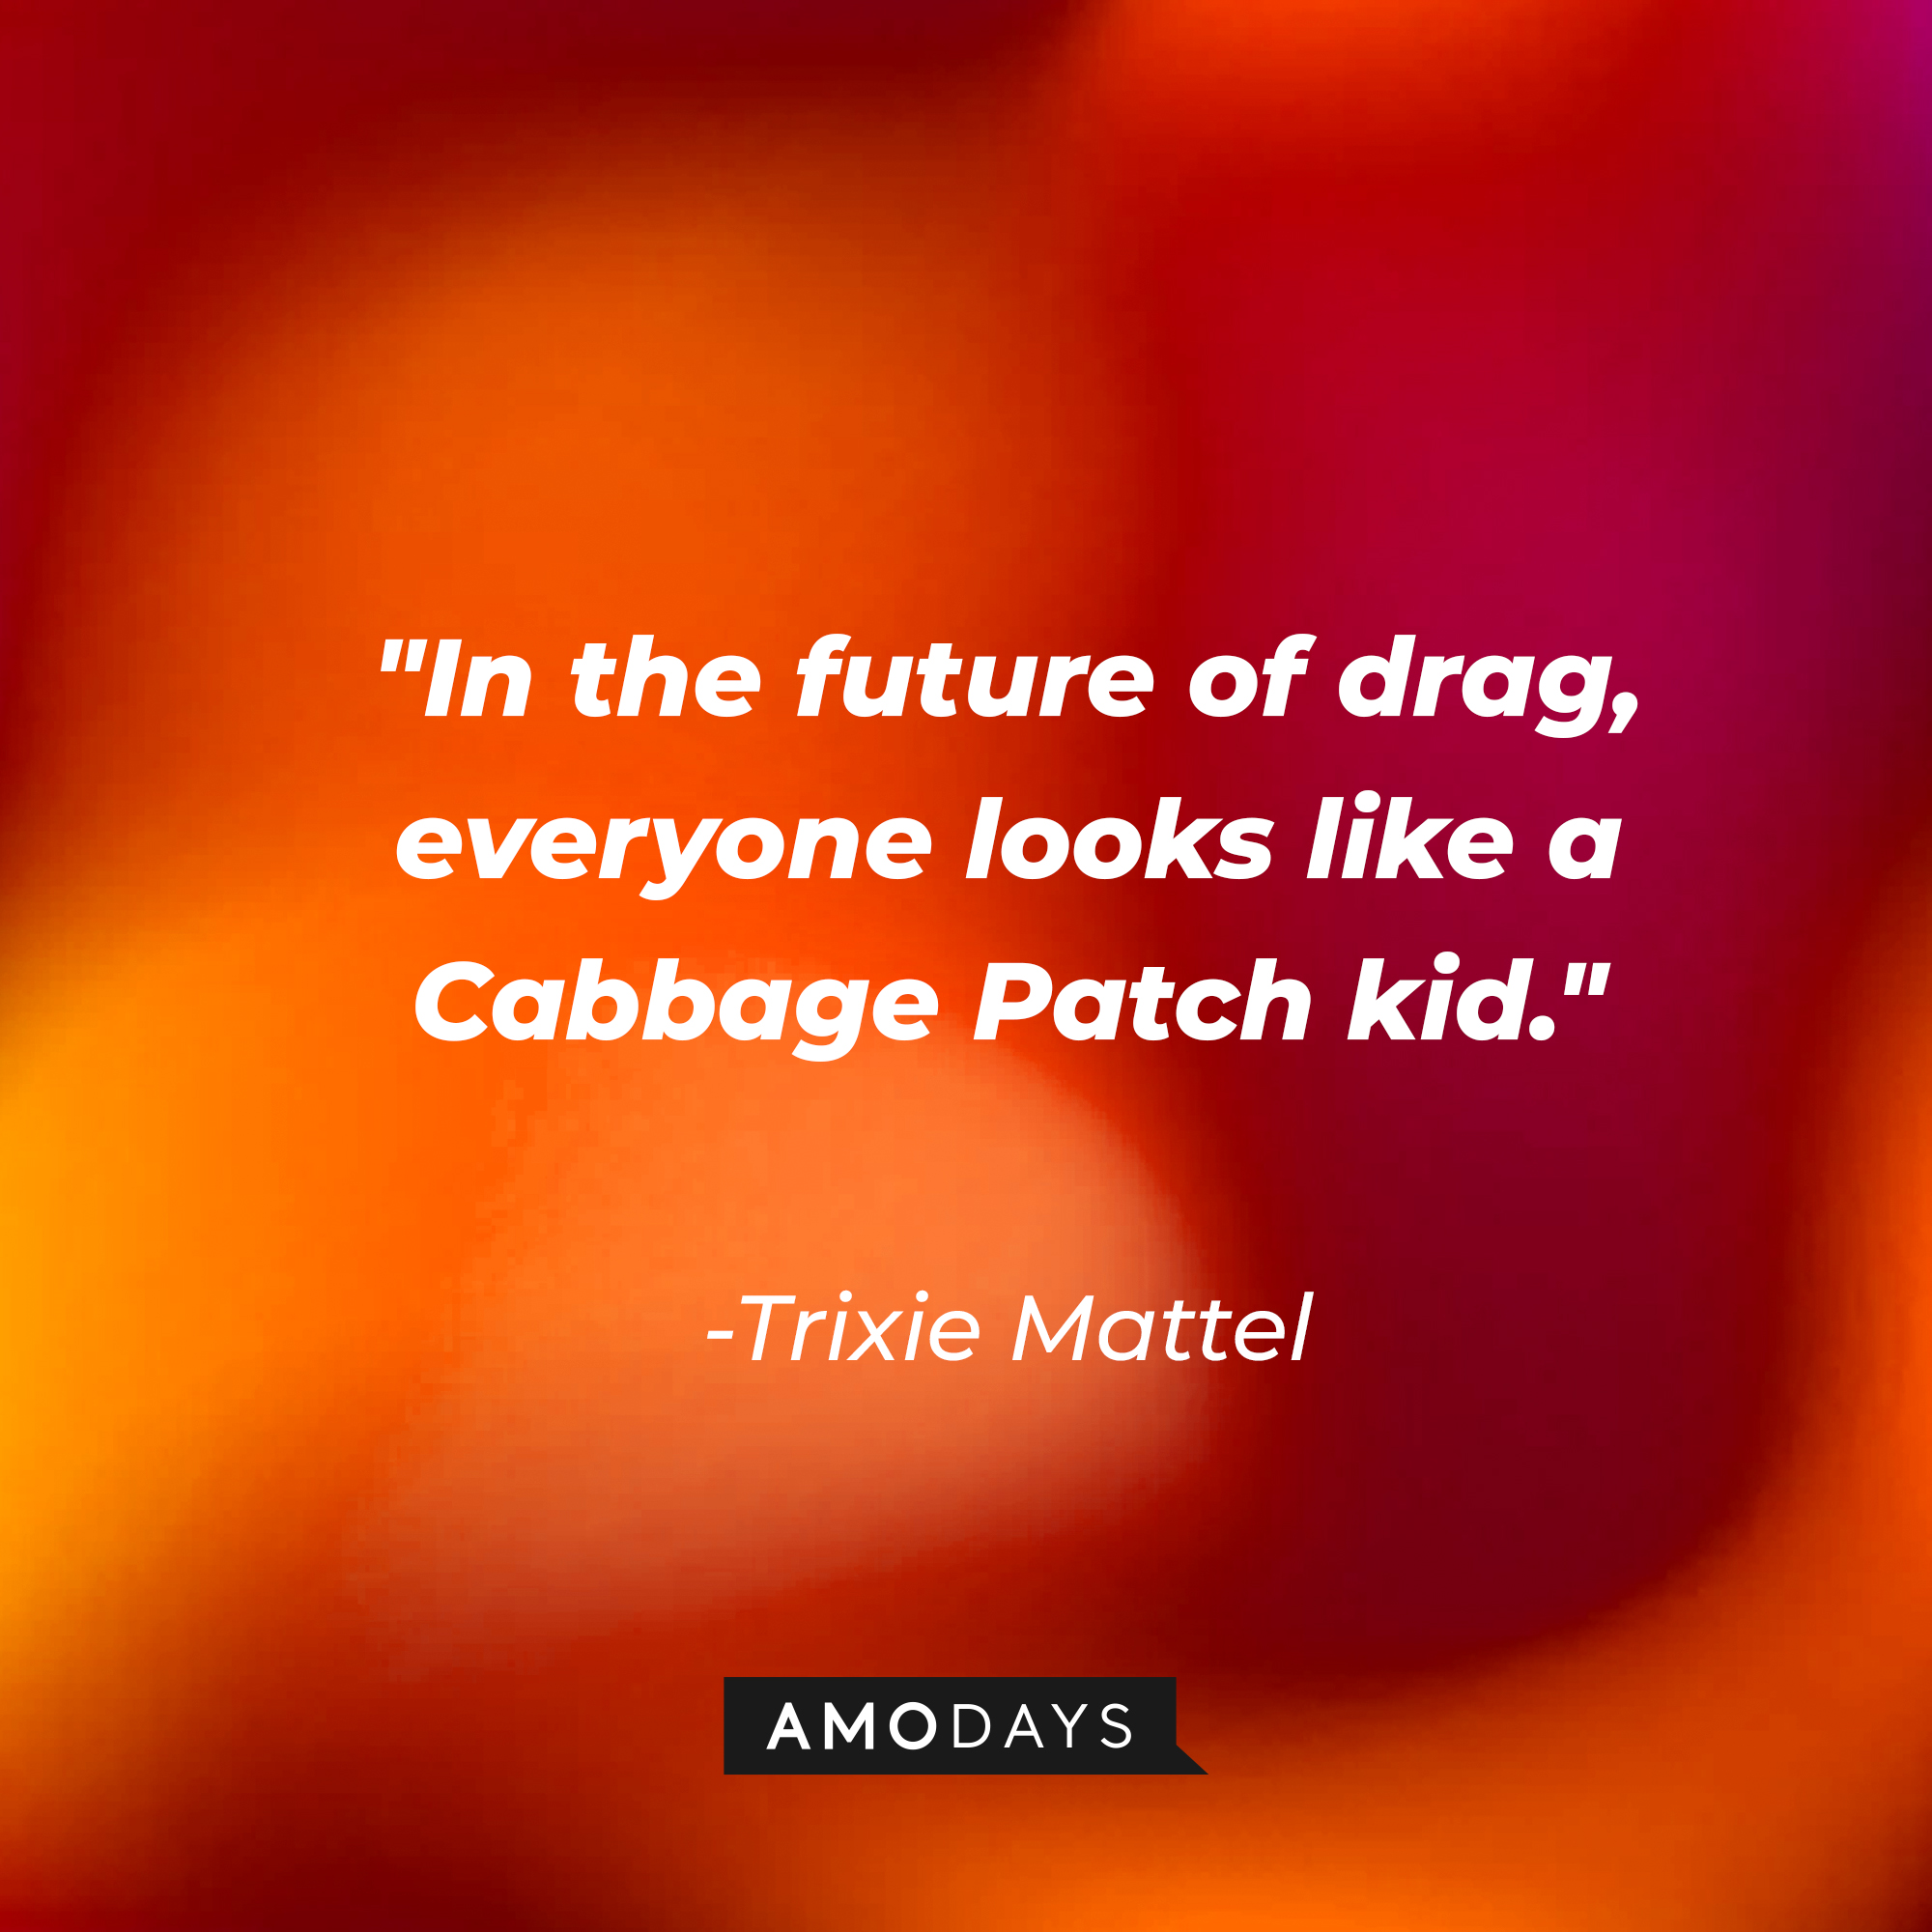 Trixie Mattel's quote: "In the future of drag, everyone looks like a Cabbage Patch kid." | Source: AmoDays